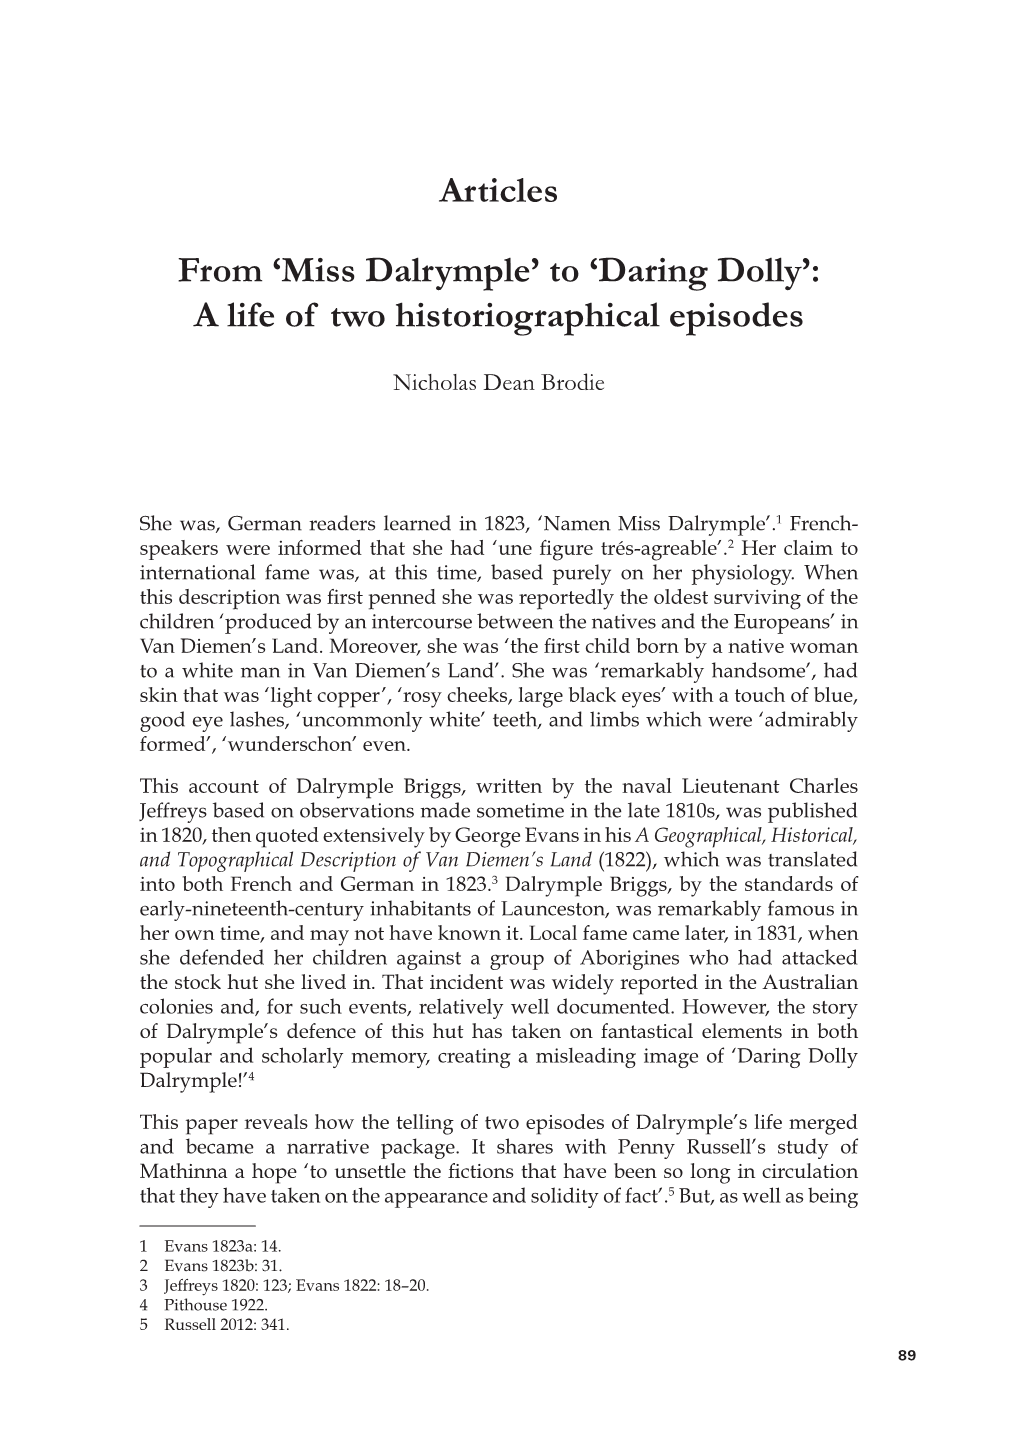 'Miss Dalrymple' to 'Daring Dolly': a Life of Two Historiographical Episodes